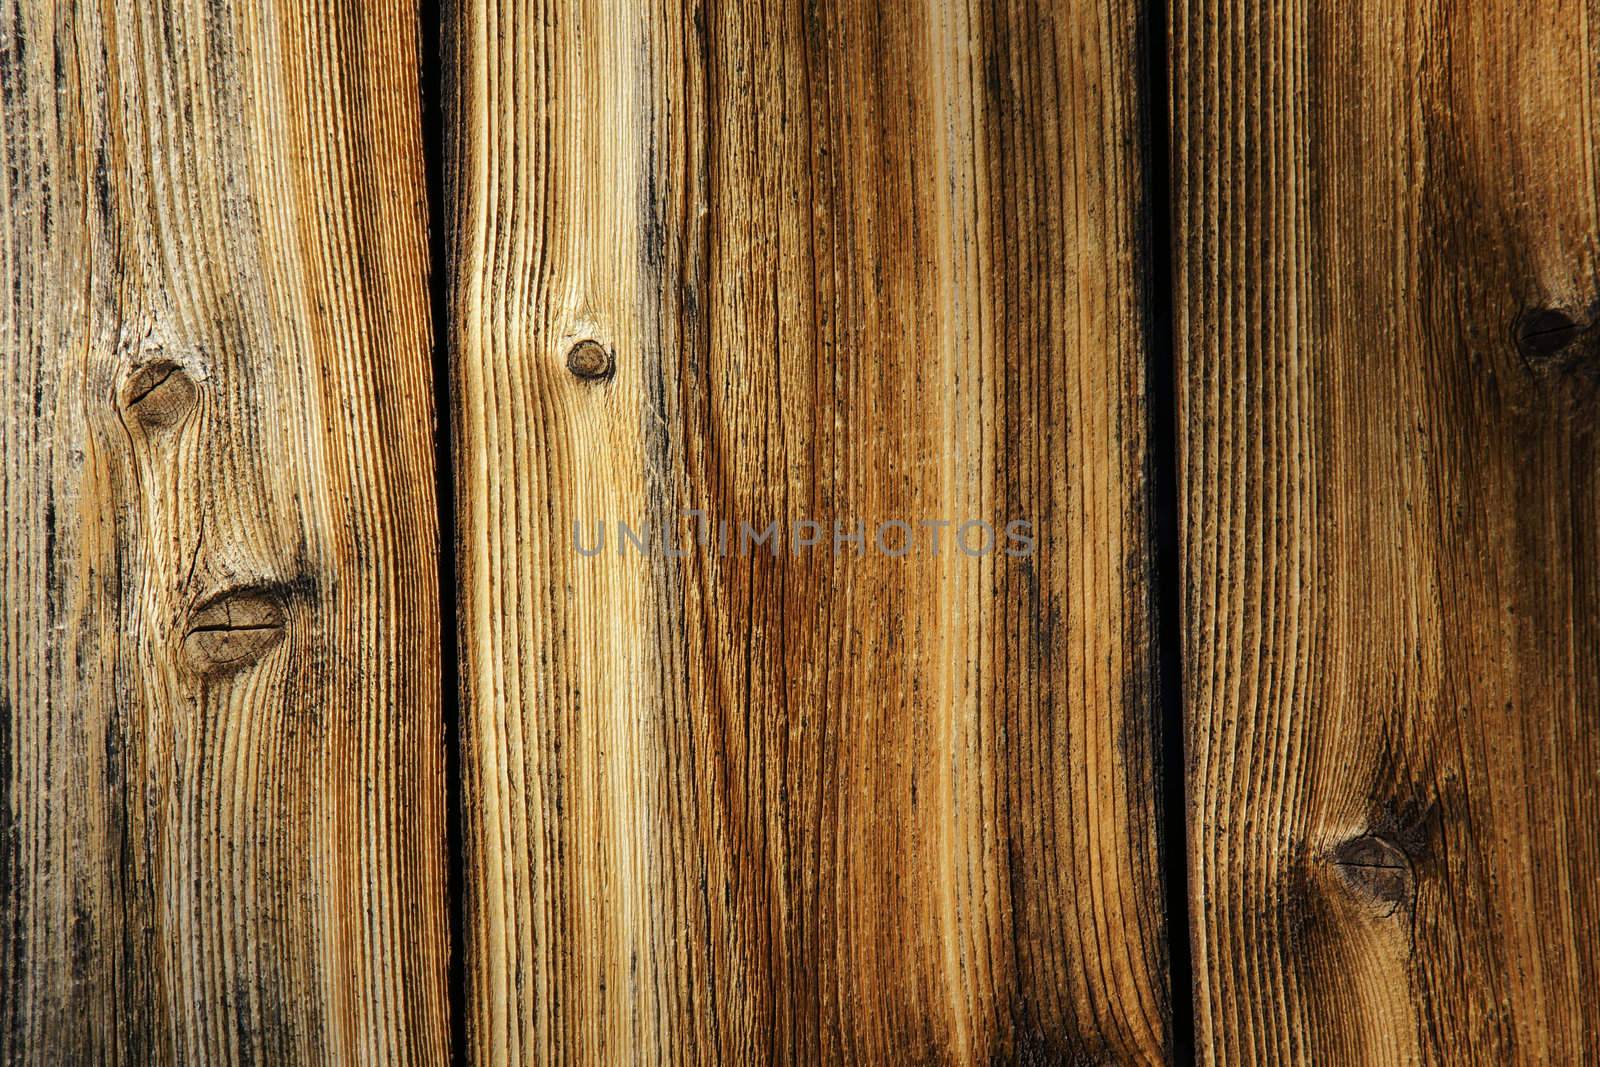 Weathered wood by Mirage3